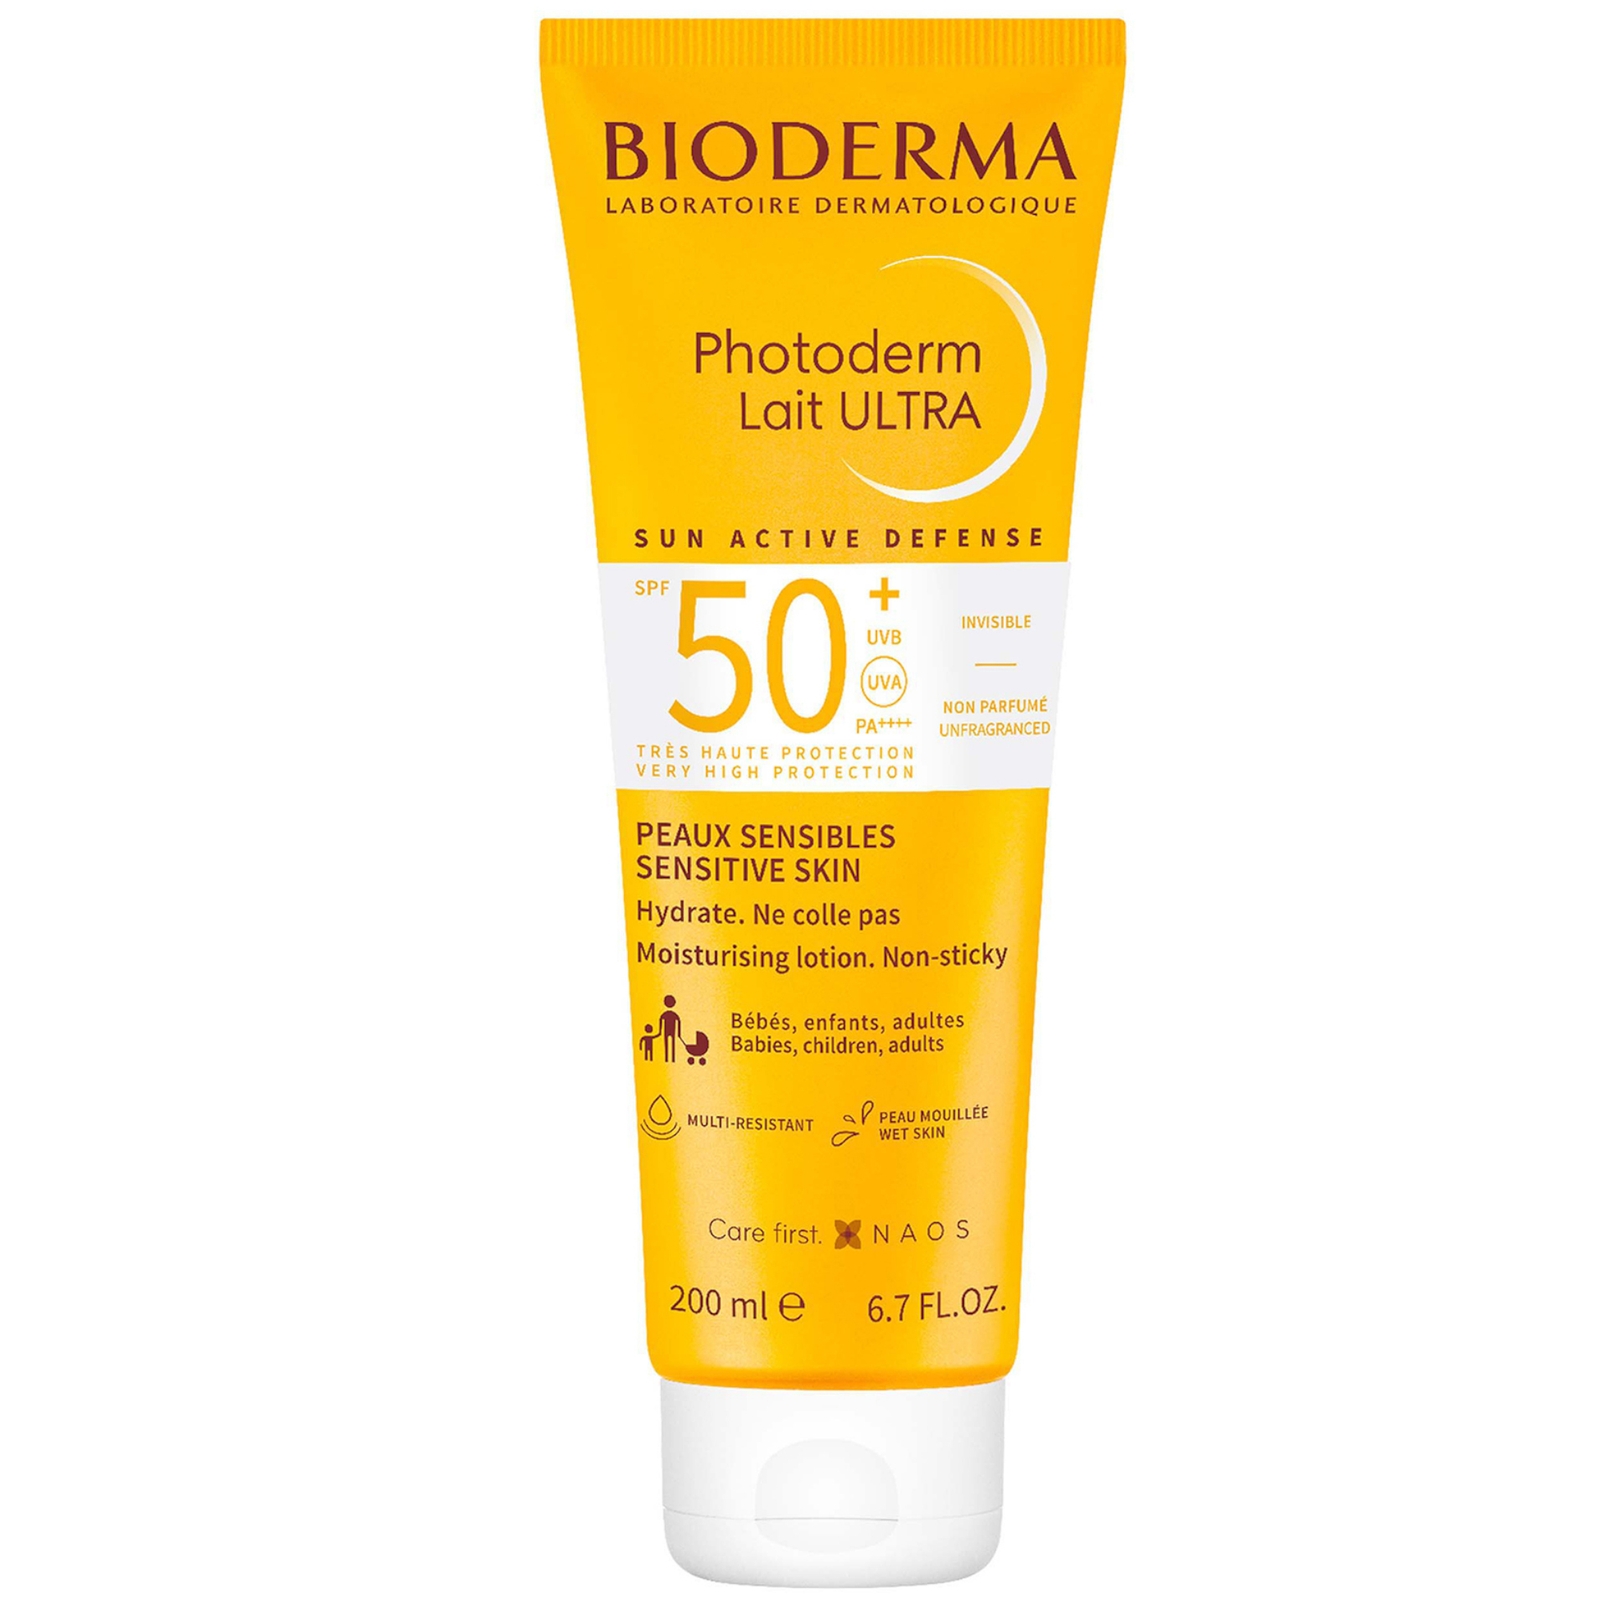 Image of Bioderma Photoderm Lait Ultra SPF50+ Very High Protection Sunscreen 200ml